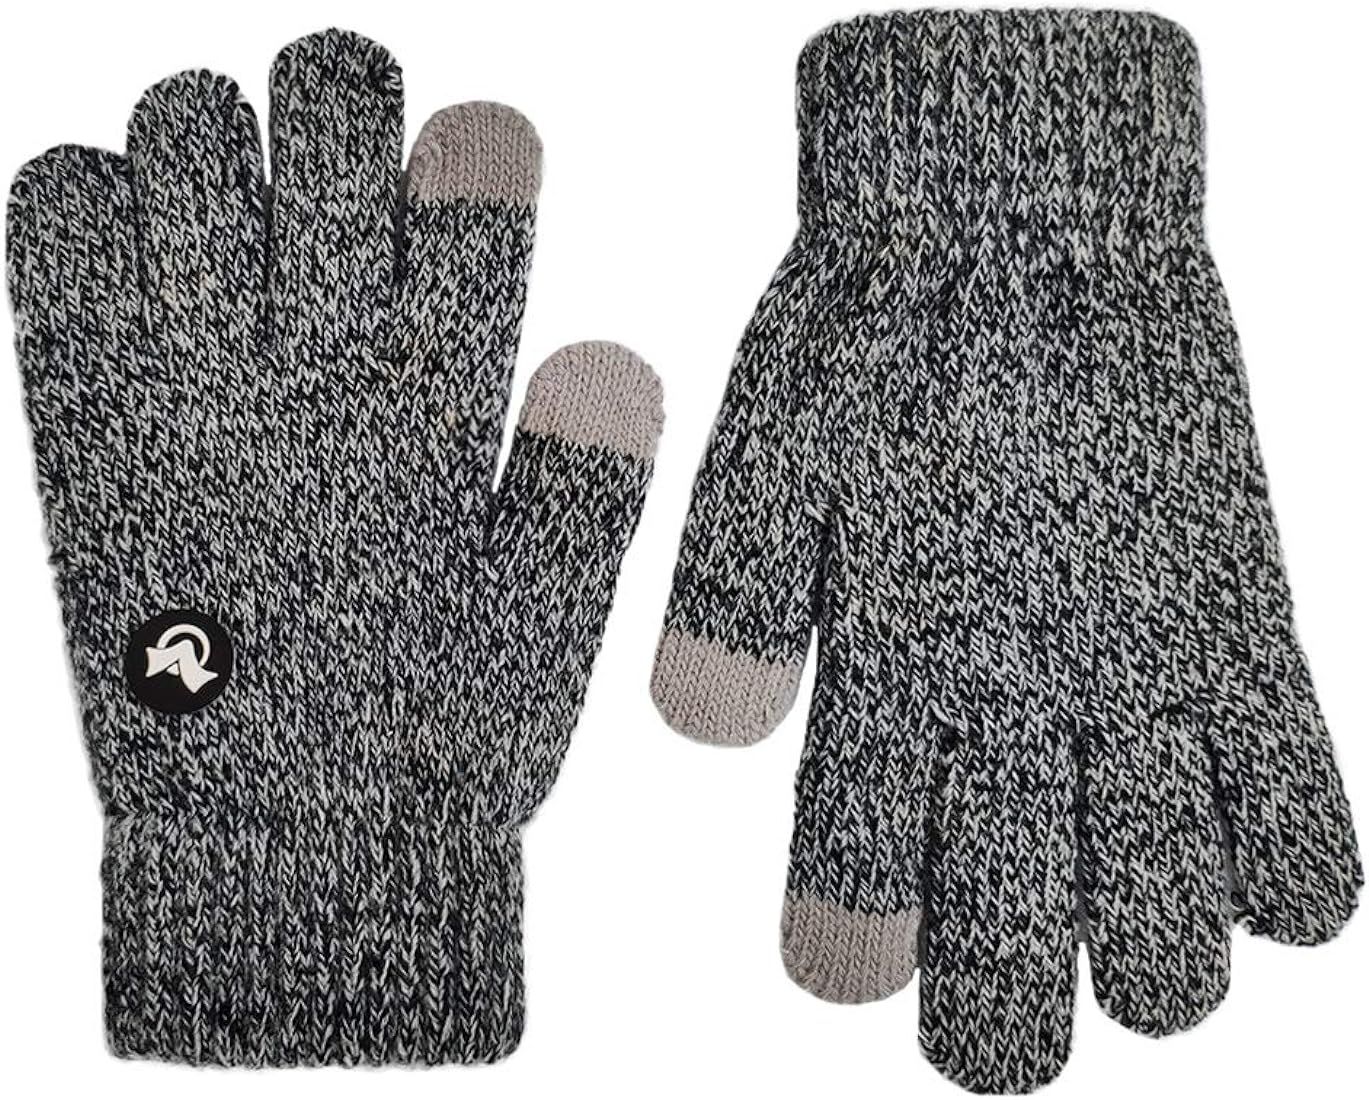 LETHMIK Mix Knit Touchscreen Gloves,Kids Texting Winter Cold Weather Gloves for Boys&Girls | Amazon (US)